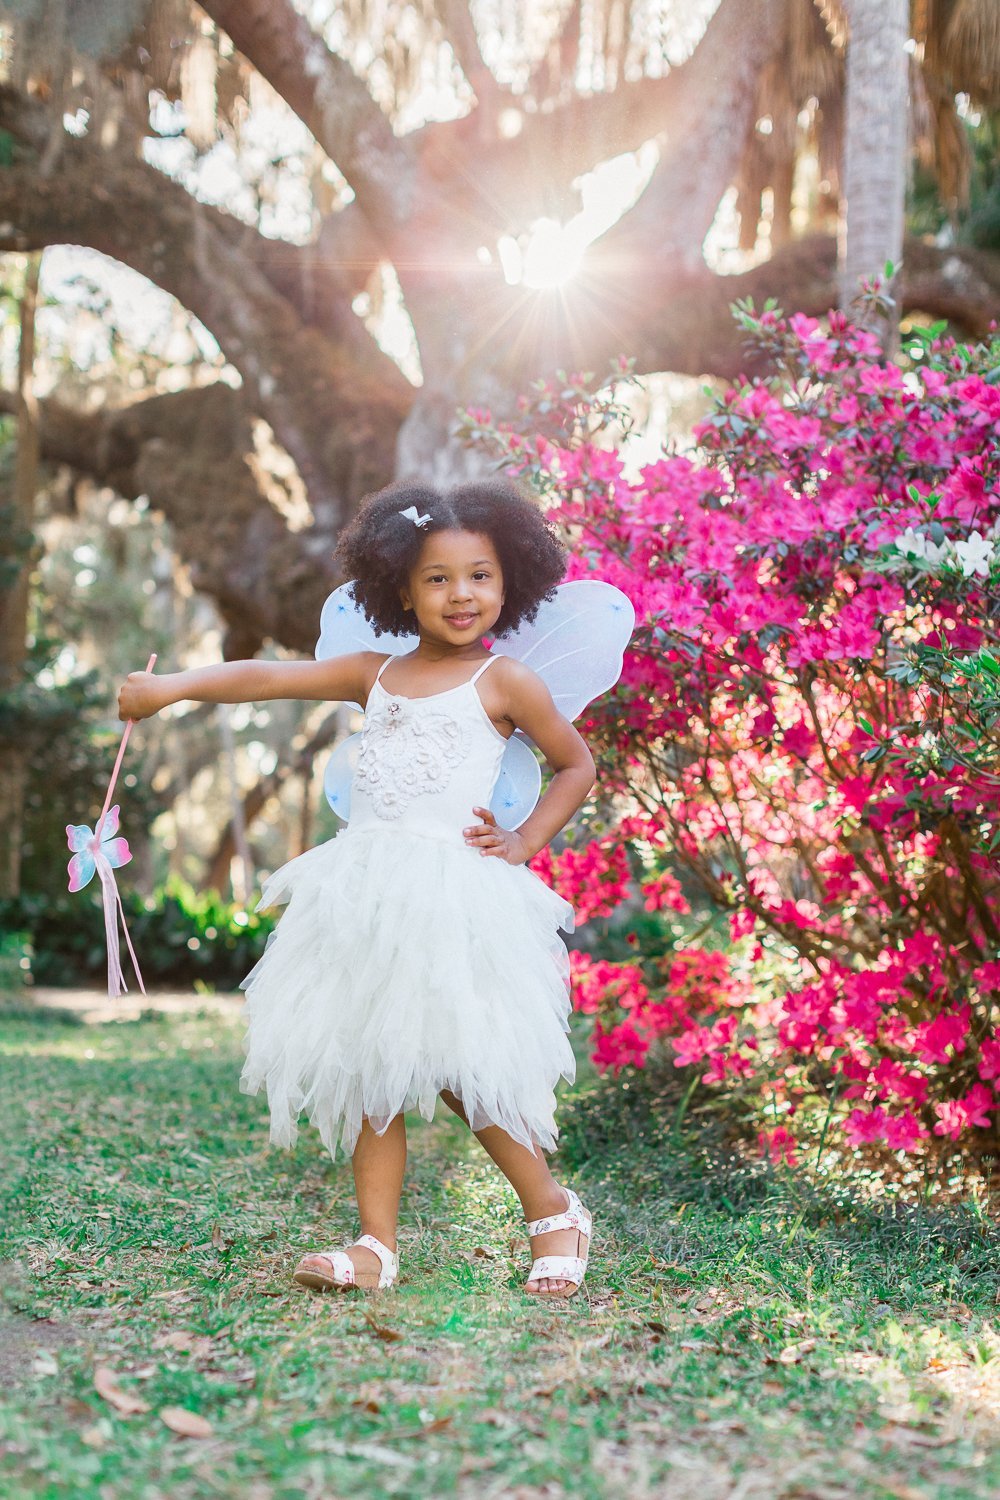 spring sunset fairy-themed pictures in Washington oaks gardens